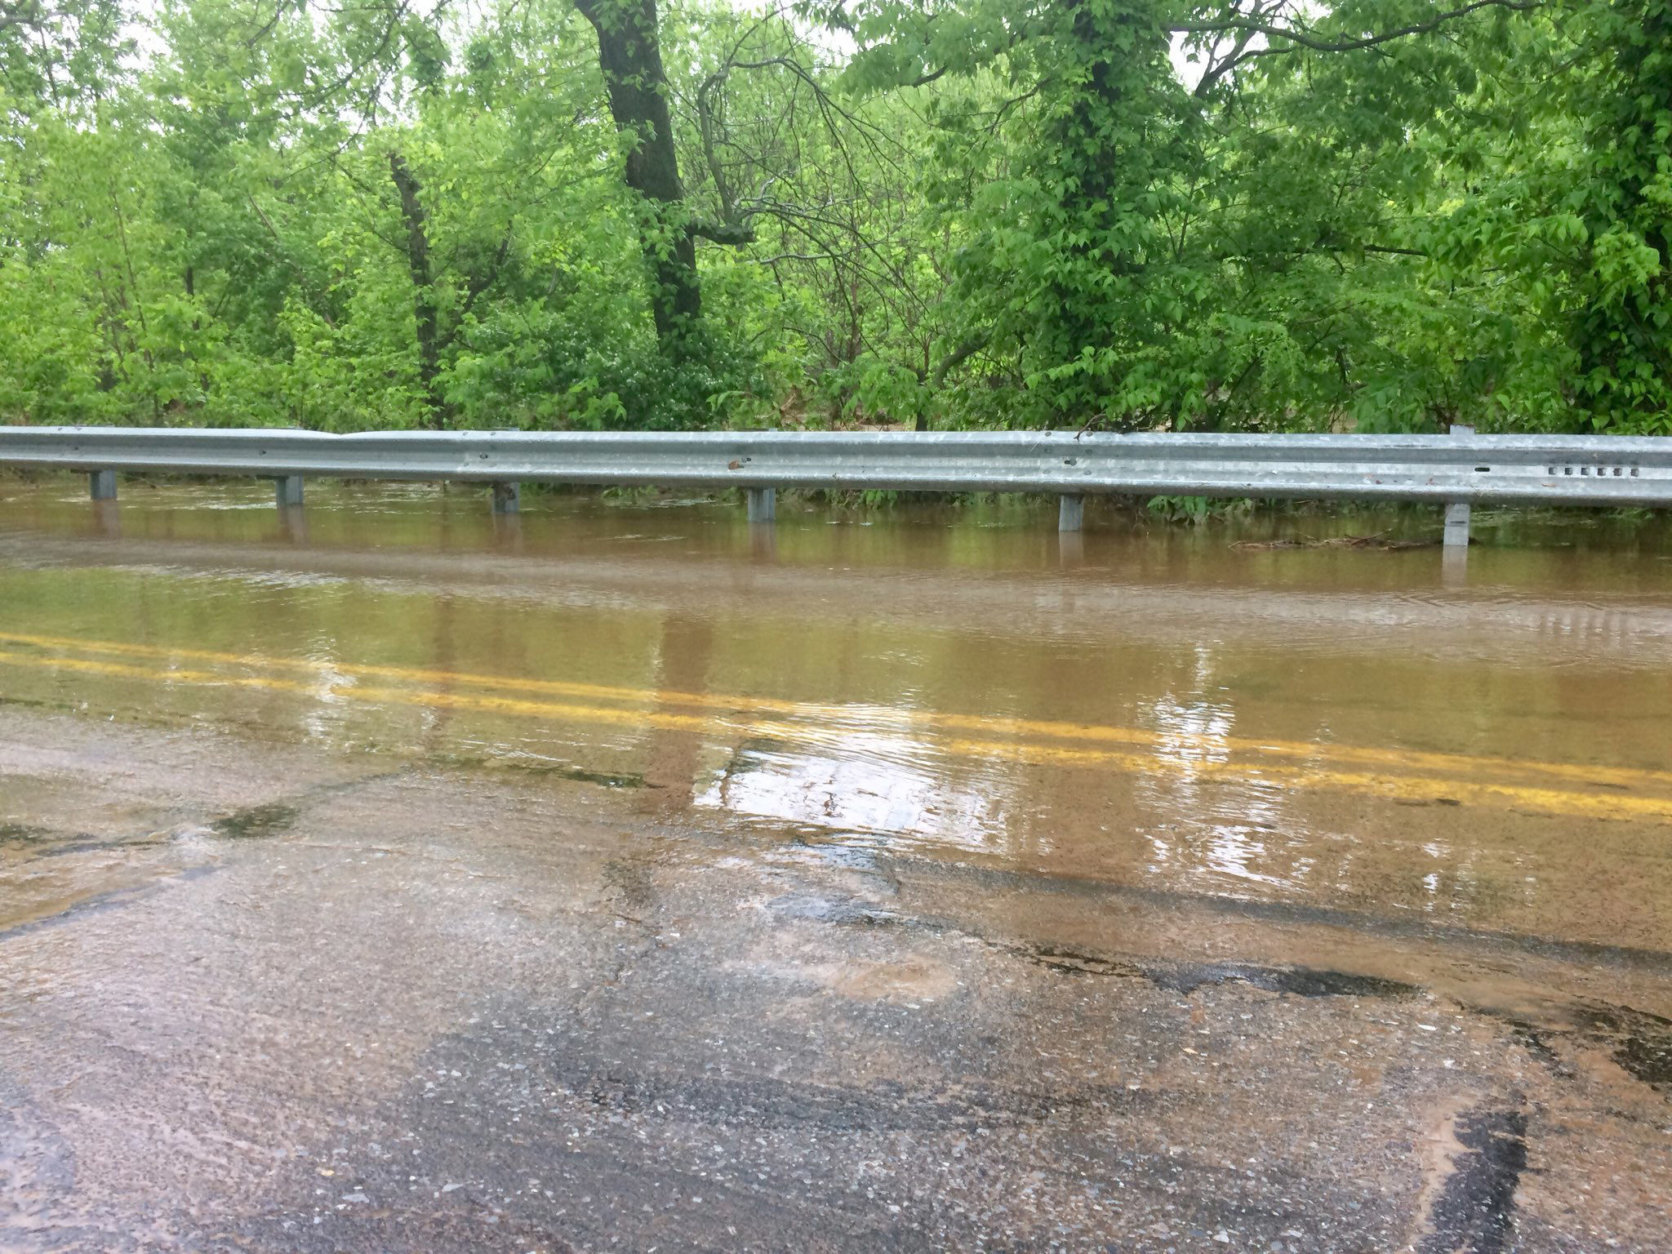 Roads are still flooded in Frederick, Maryland, and water rescues are still happening Thursday, May 17, 2018. (WTOP/Nick Iannelli)